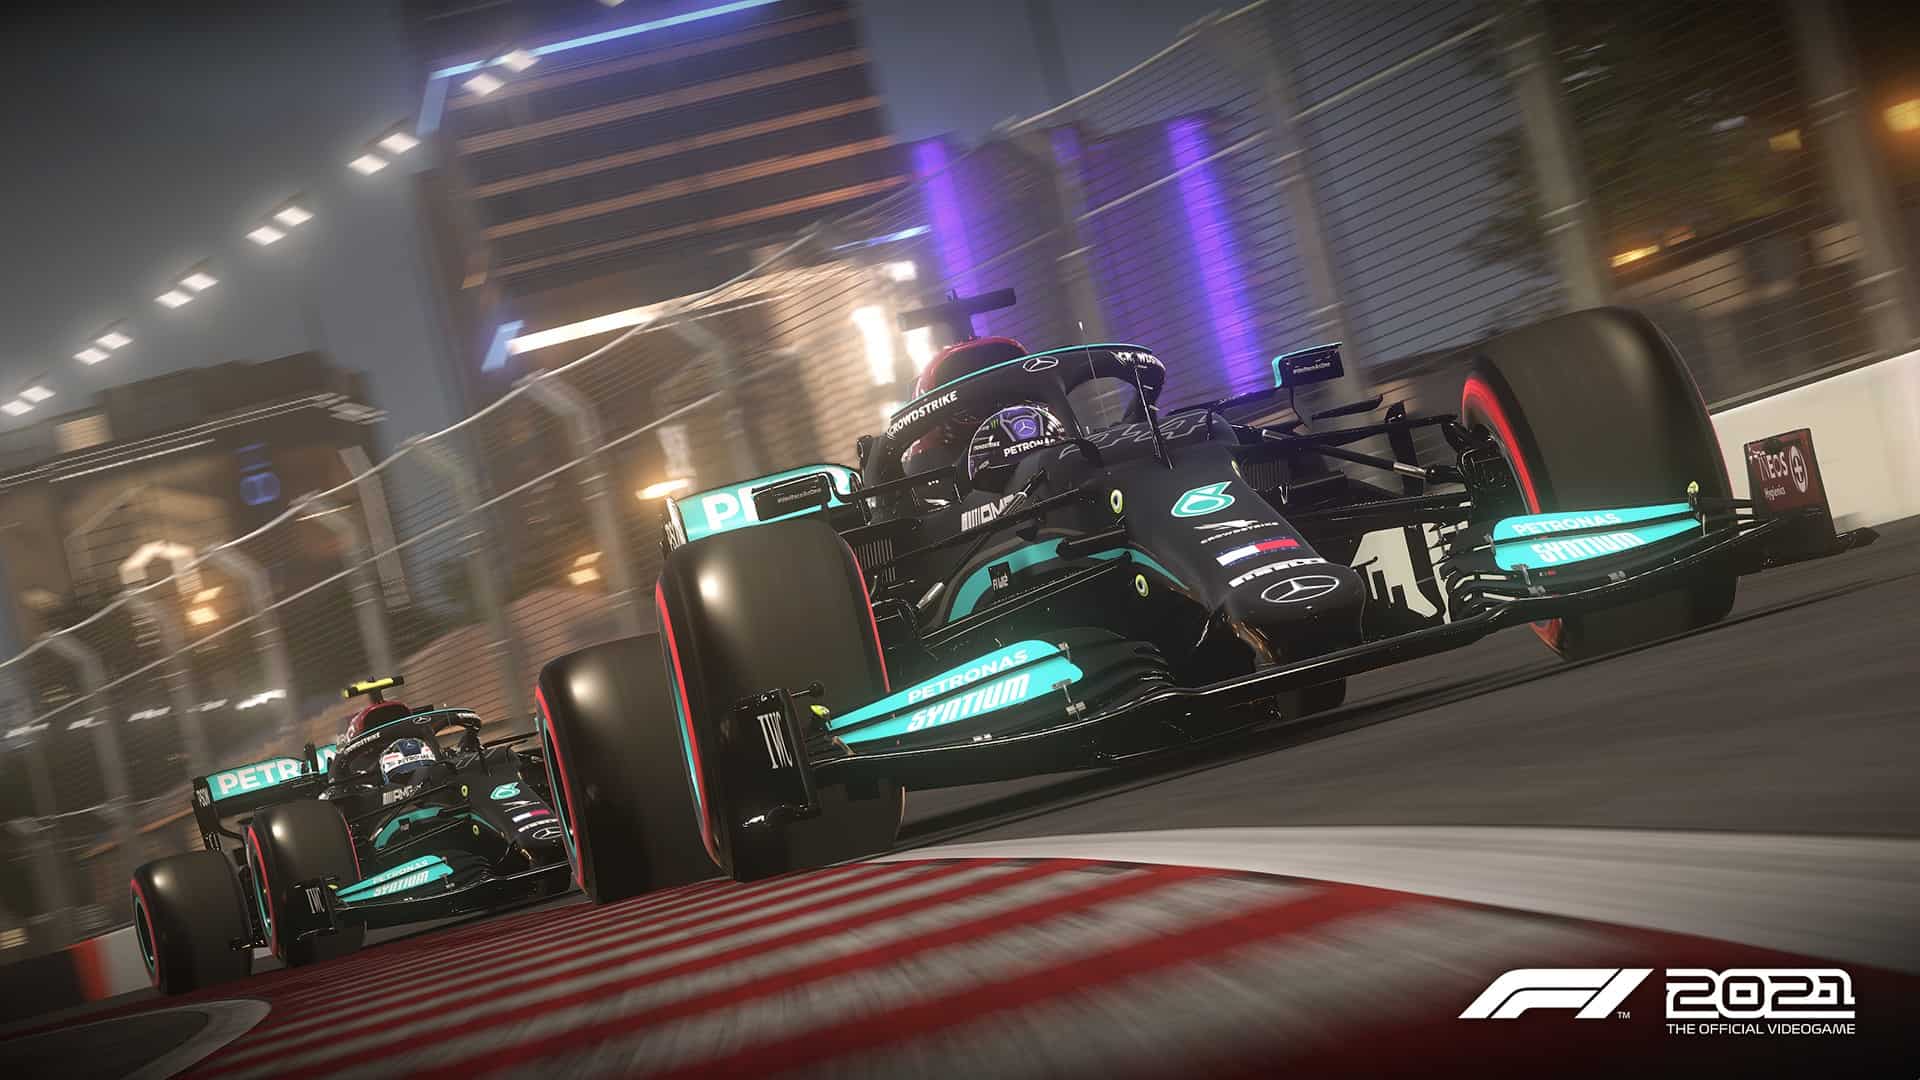 F1 2021 game news, advice, esports and opinions